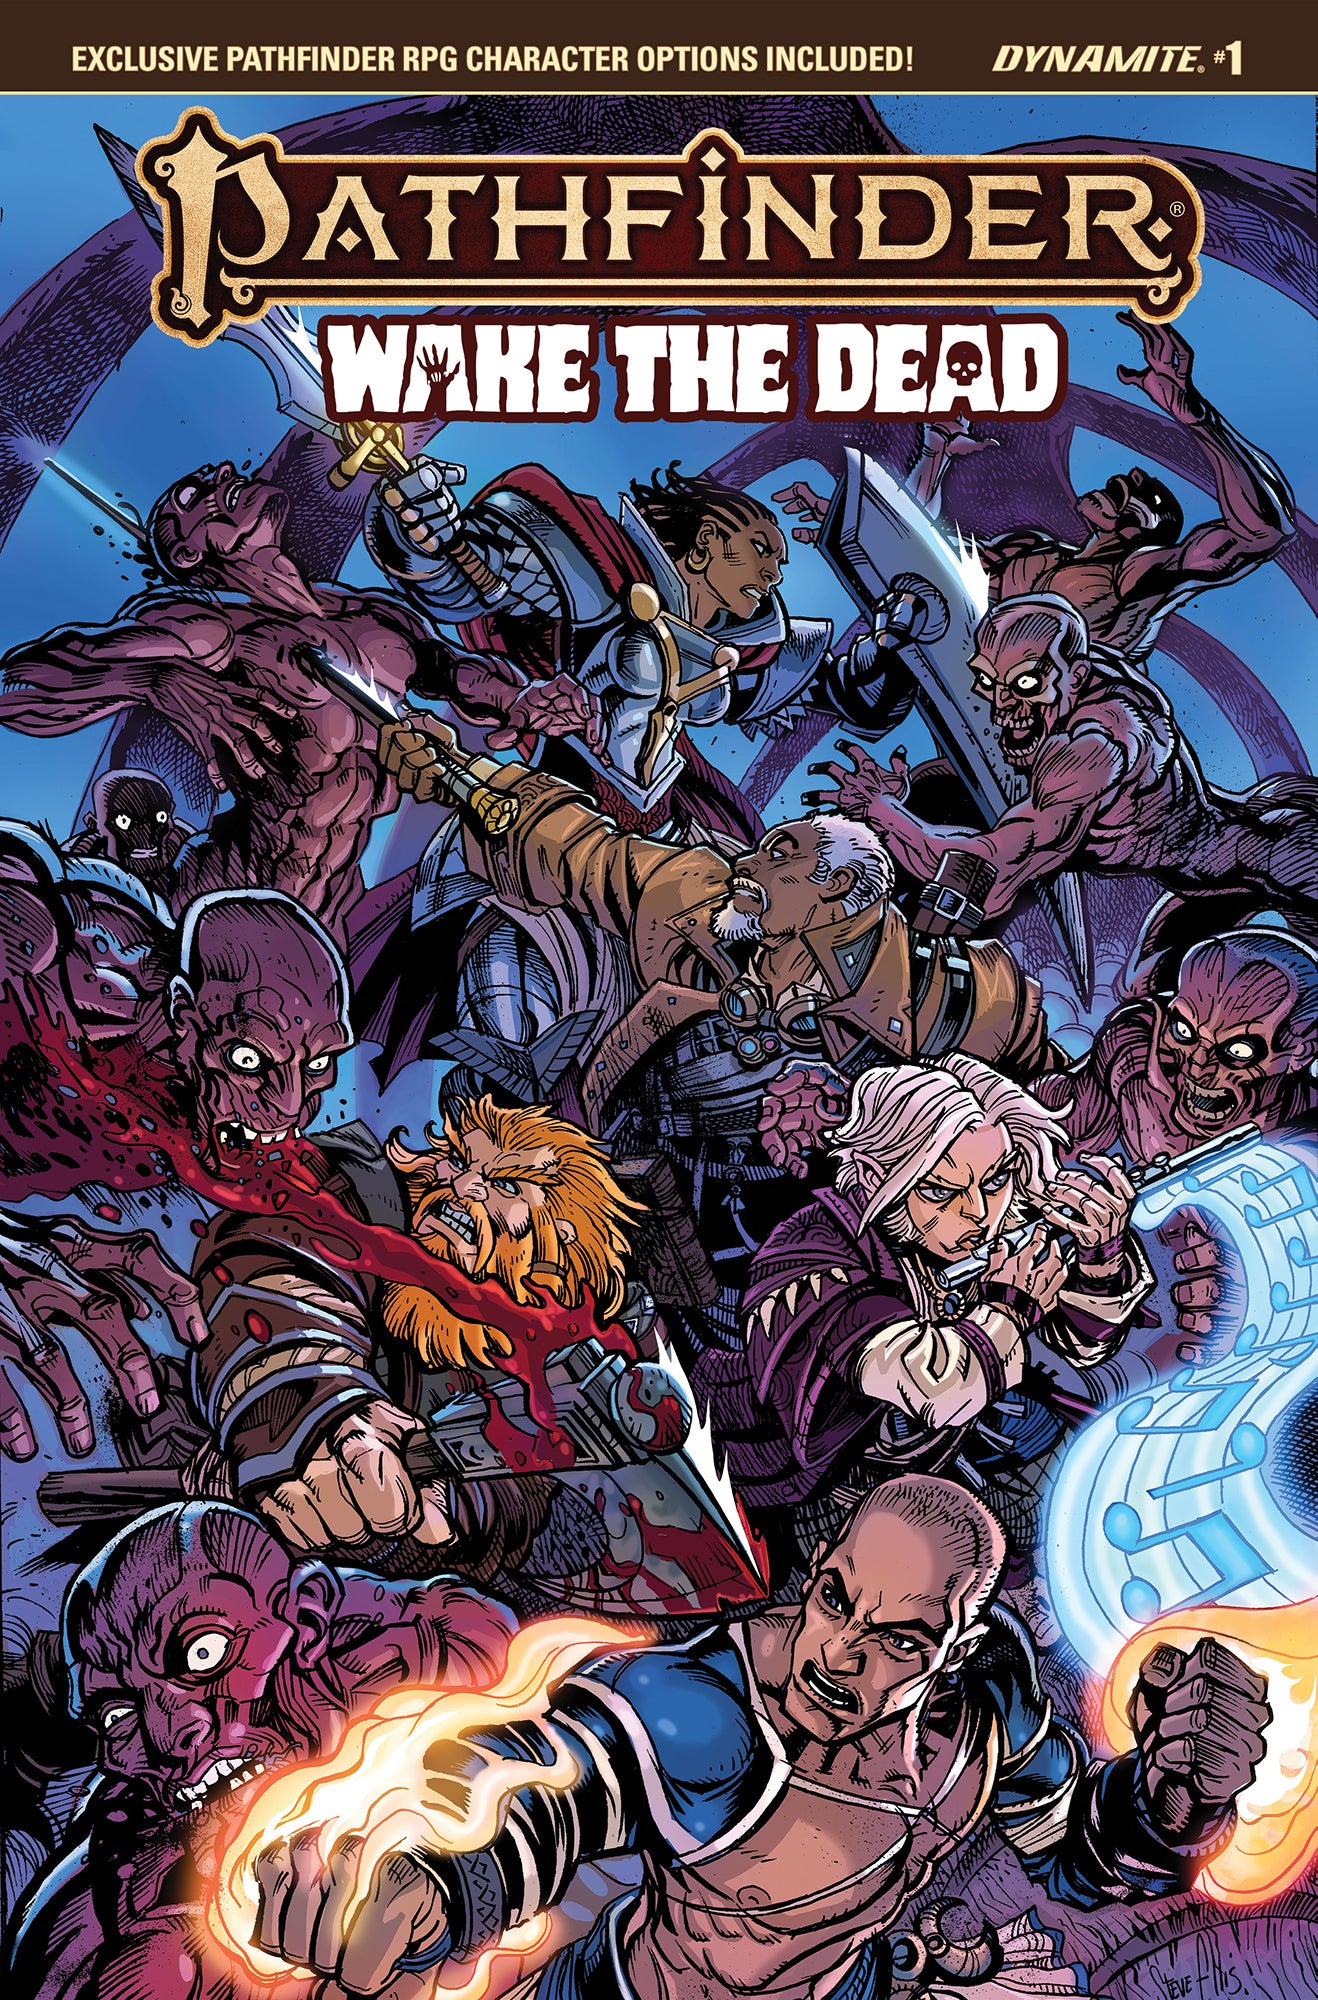 Pathfinder Wake The Dead: The pathfinder Iconics fighting their way through a hoard of undead that have them surrounded on all sides